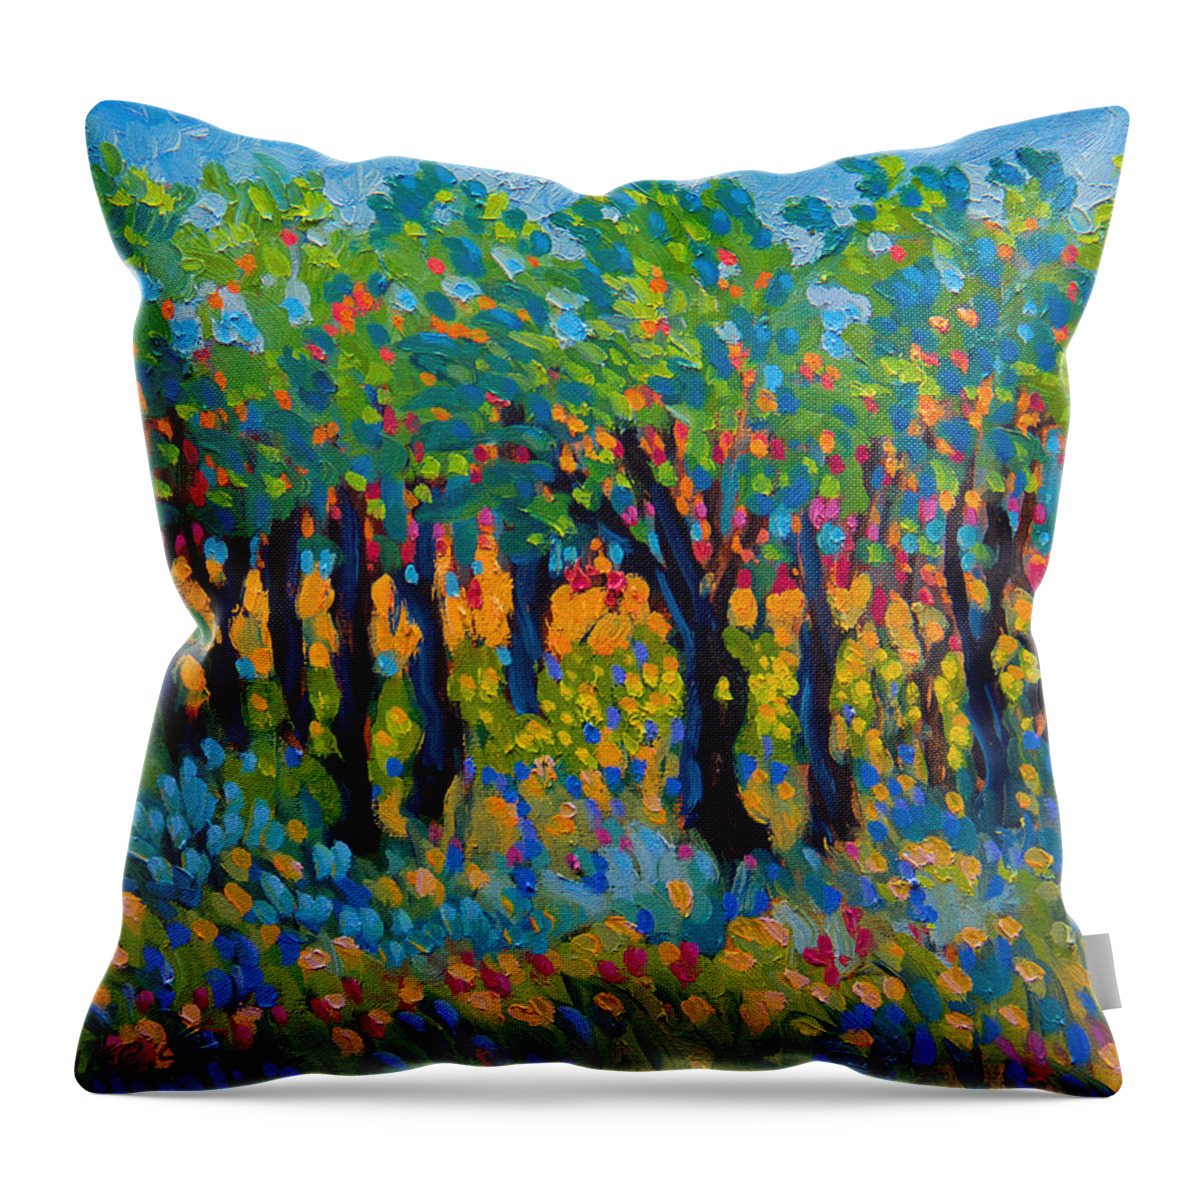 Candy Throw Pillow featuring the painting Candy Wood by Michael Gross